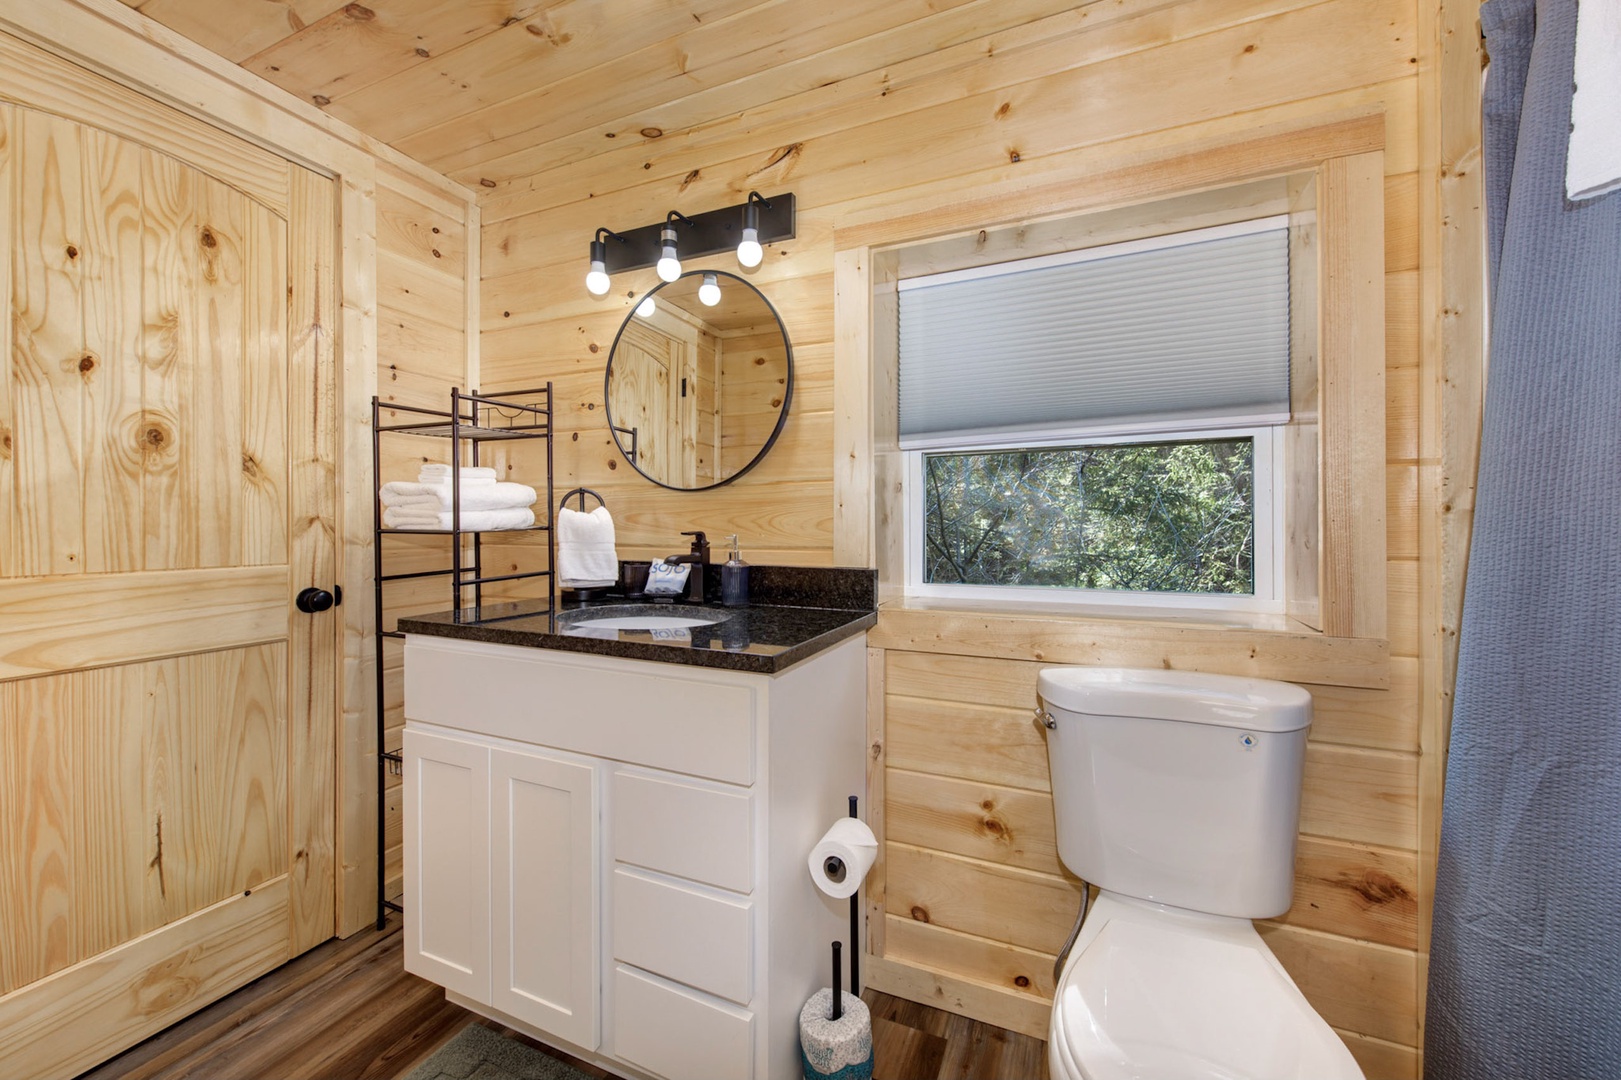 The king ensuite offers a single vanity & shower/tub combo